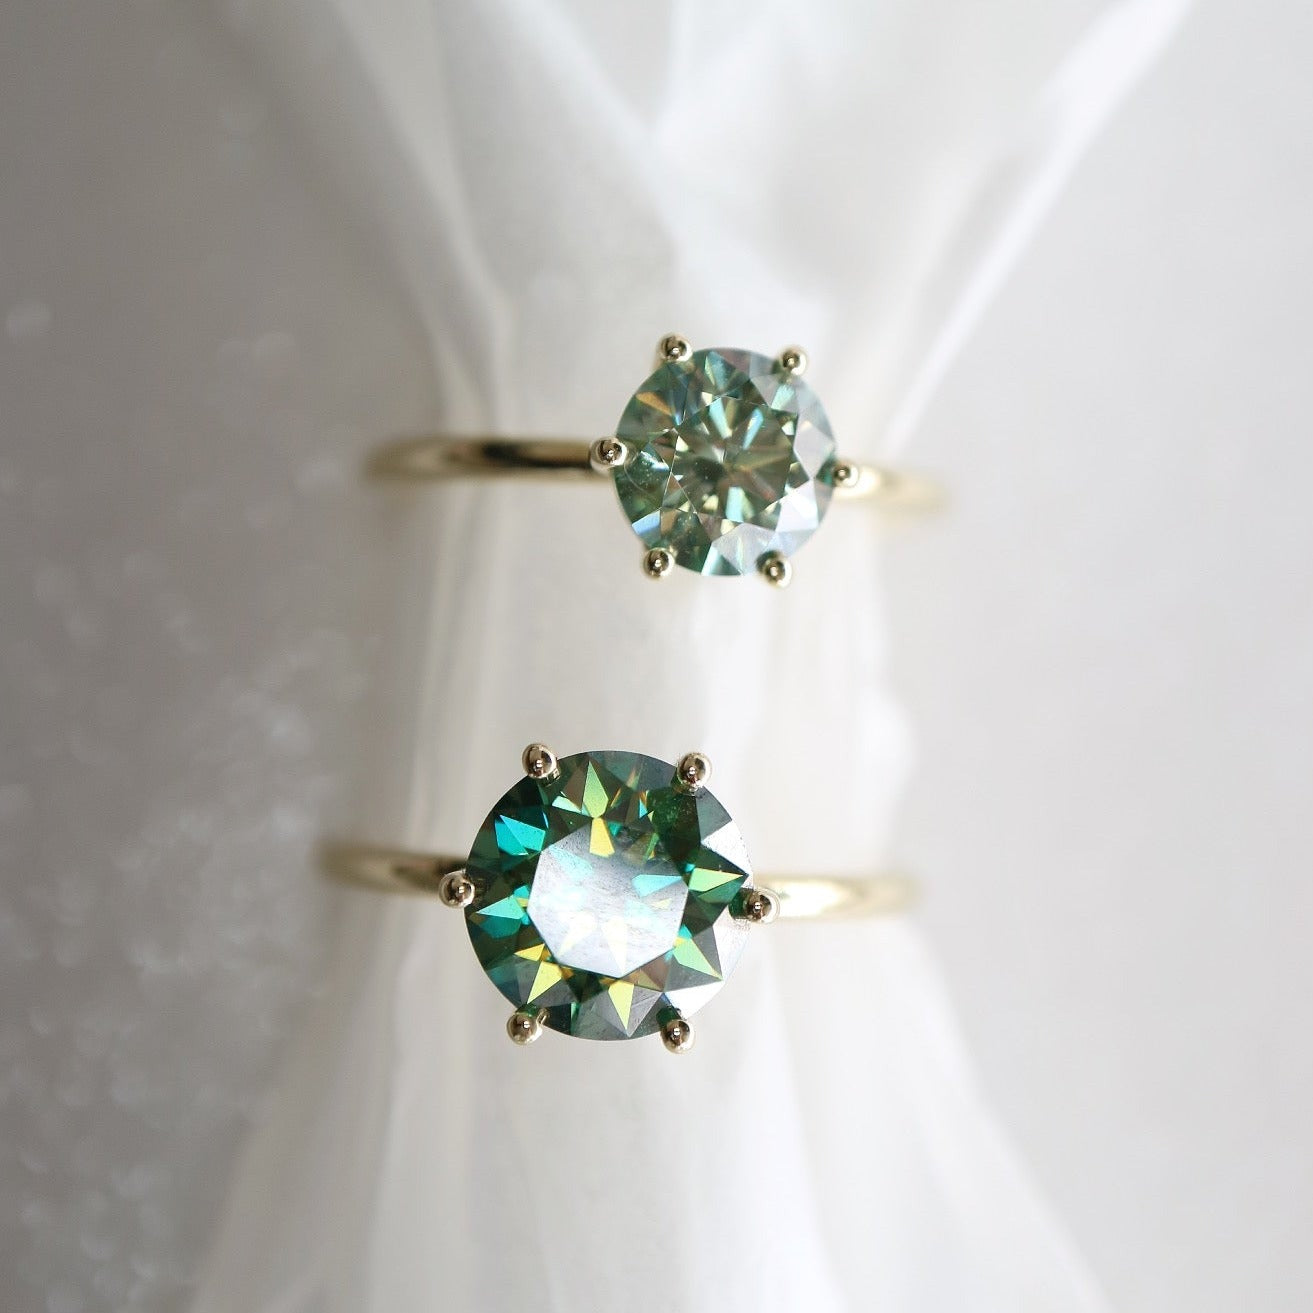 Solid gold and blue moissanite rings